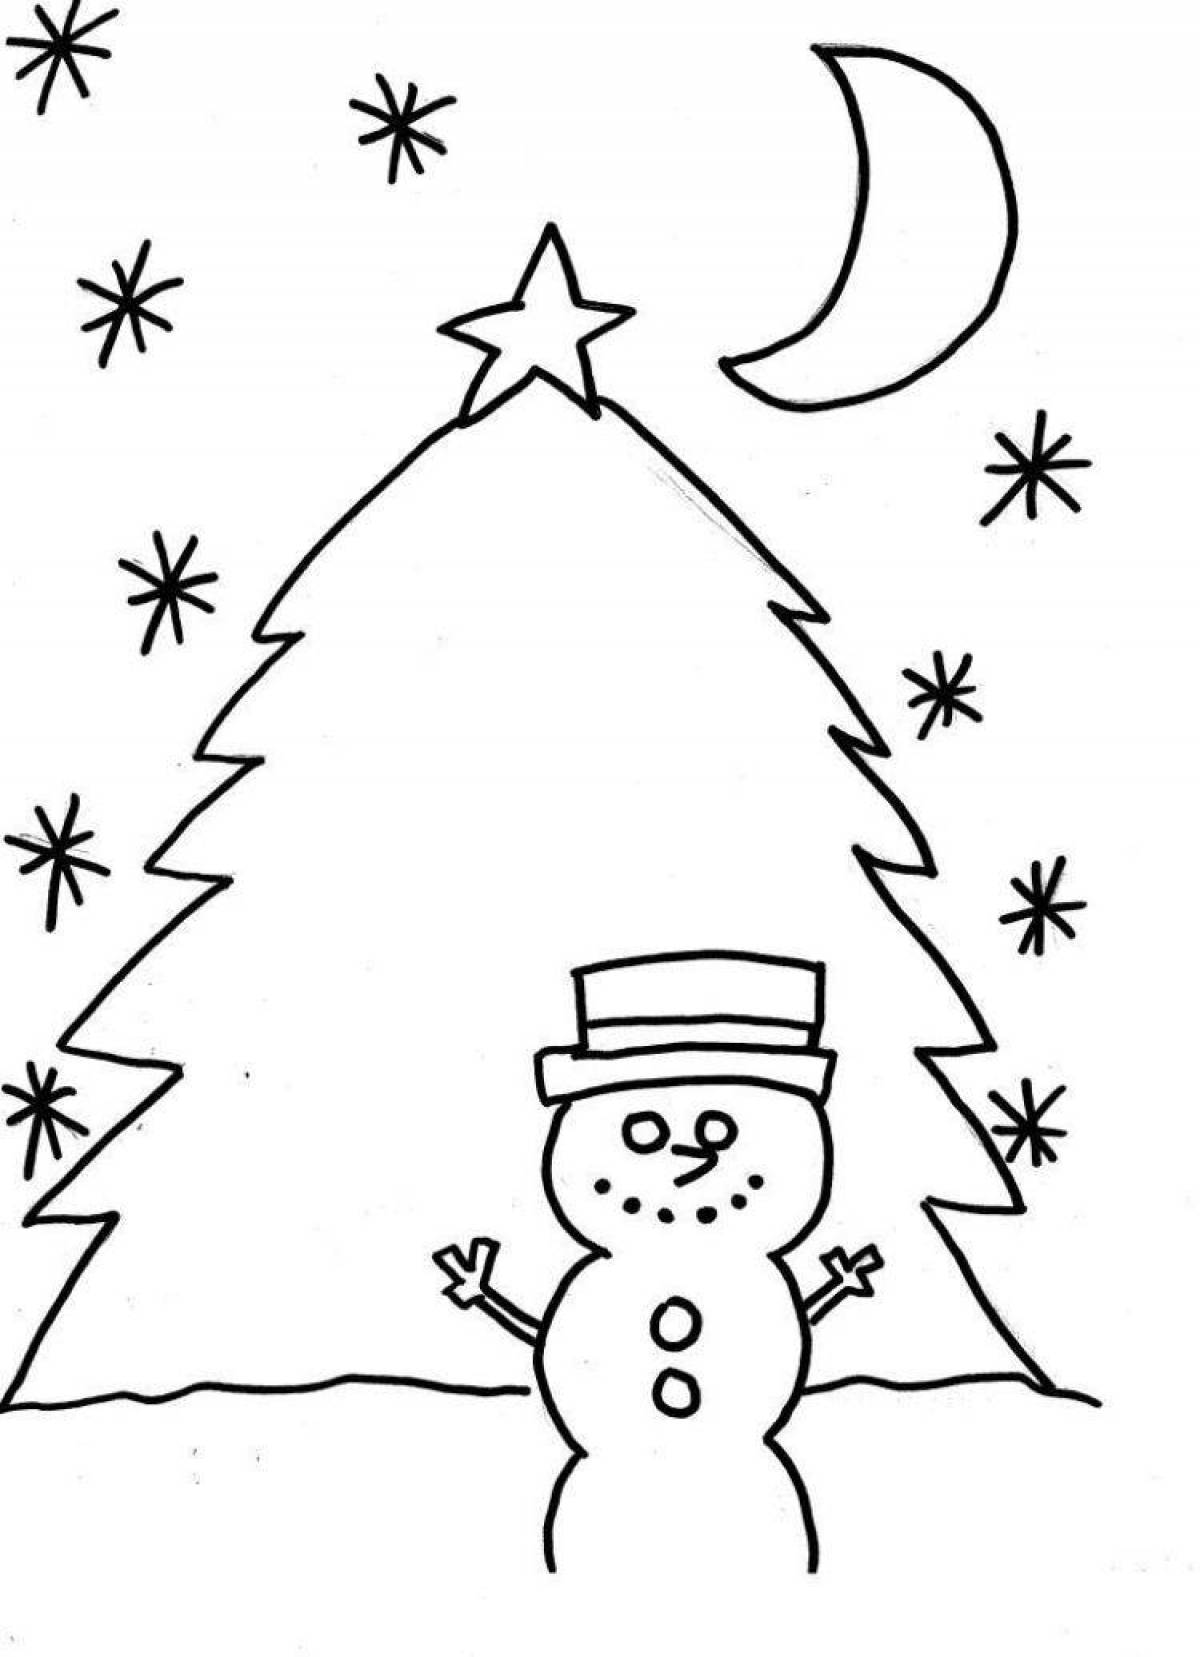 Coloring tree and snowman